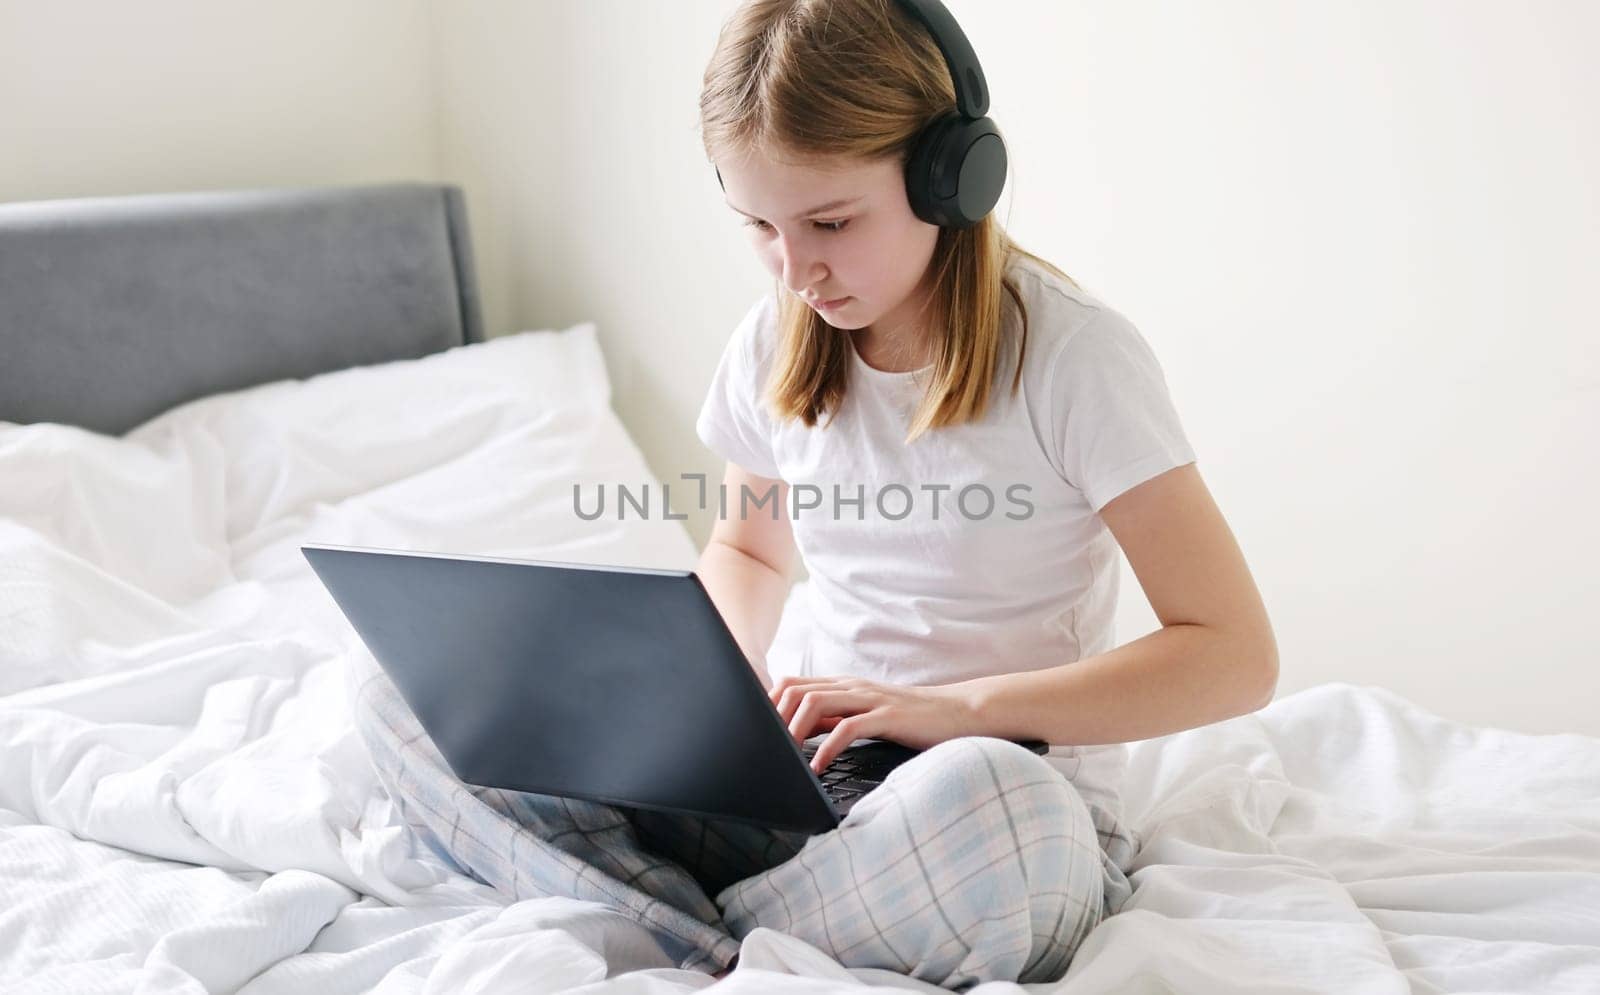 Focused Little Girl Doing Her Homework Online On A Large Bed In The Morning